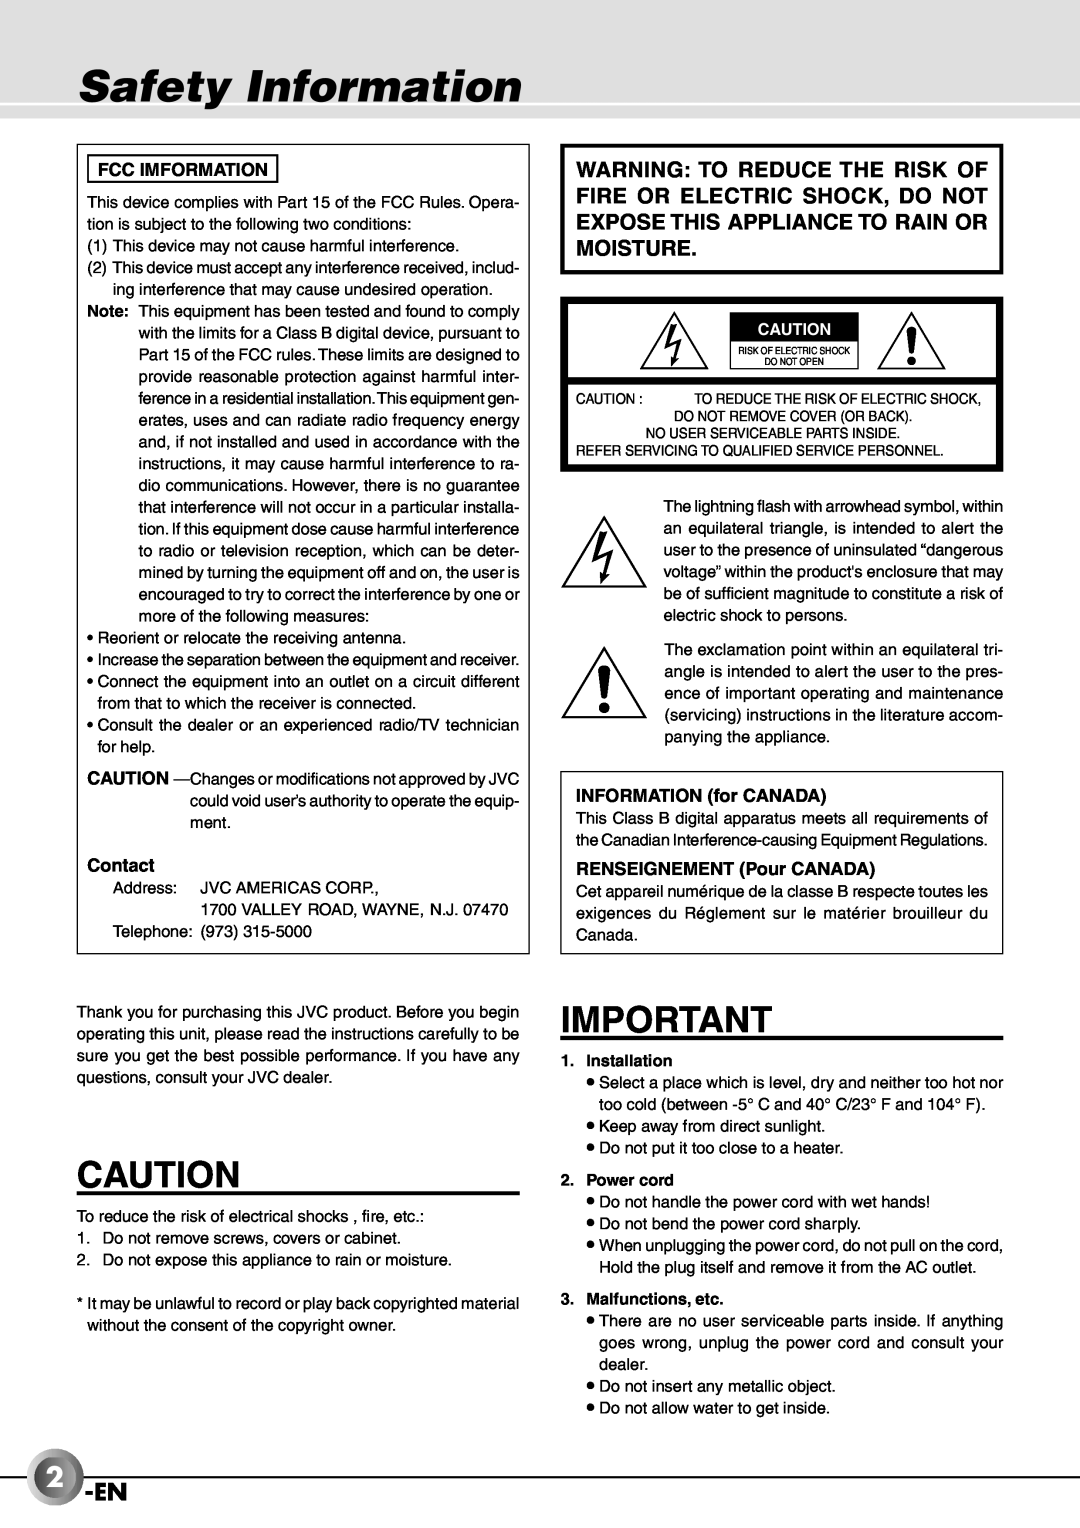 JVC JX-B555 manual Safety Information, 2-EN, Fcc Imformation, Contact, INFORMATION for CANADA, RENSEIGNEMENT Pour CANADA 